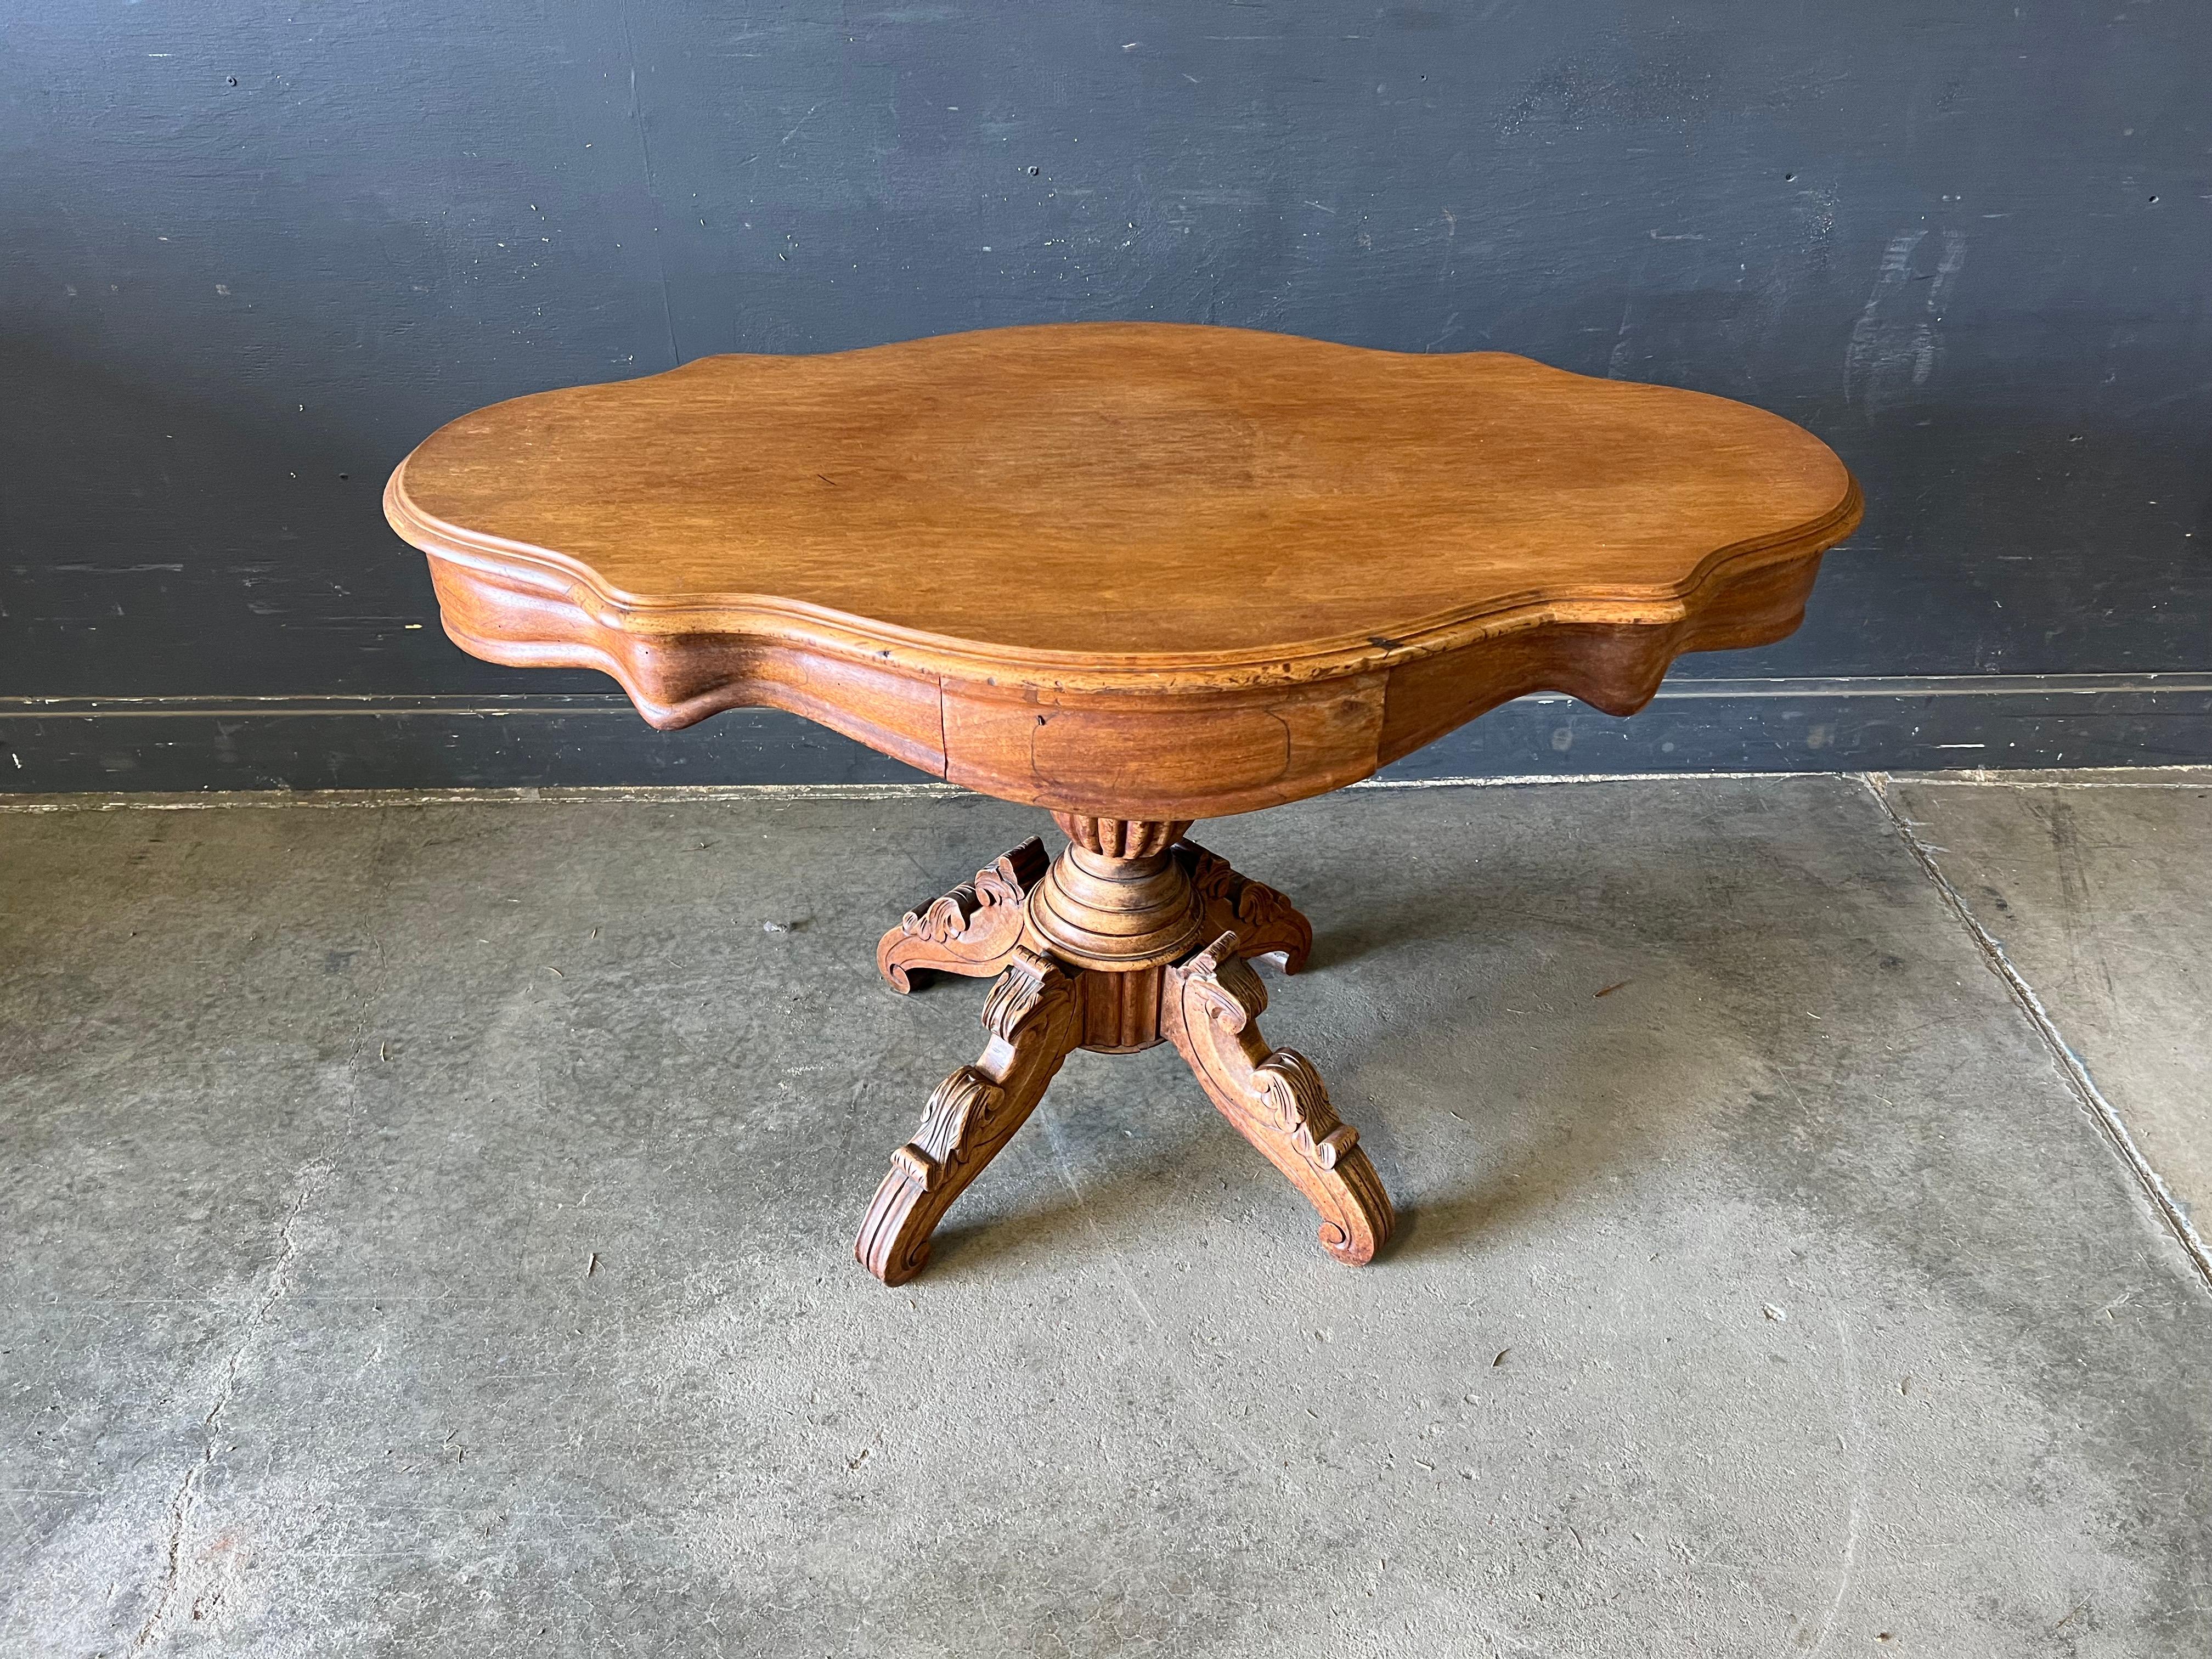 Unusual table, either Swiss or Swedish. Was brought to the USA by cellist Haim Zemach. Has two drawers. With partial label underside of table. Great form and turnings on base and top. Maker is unknown.